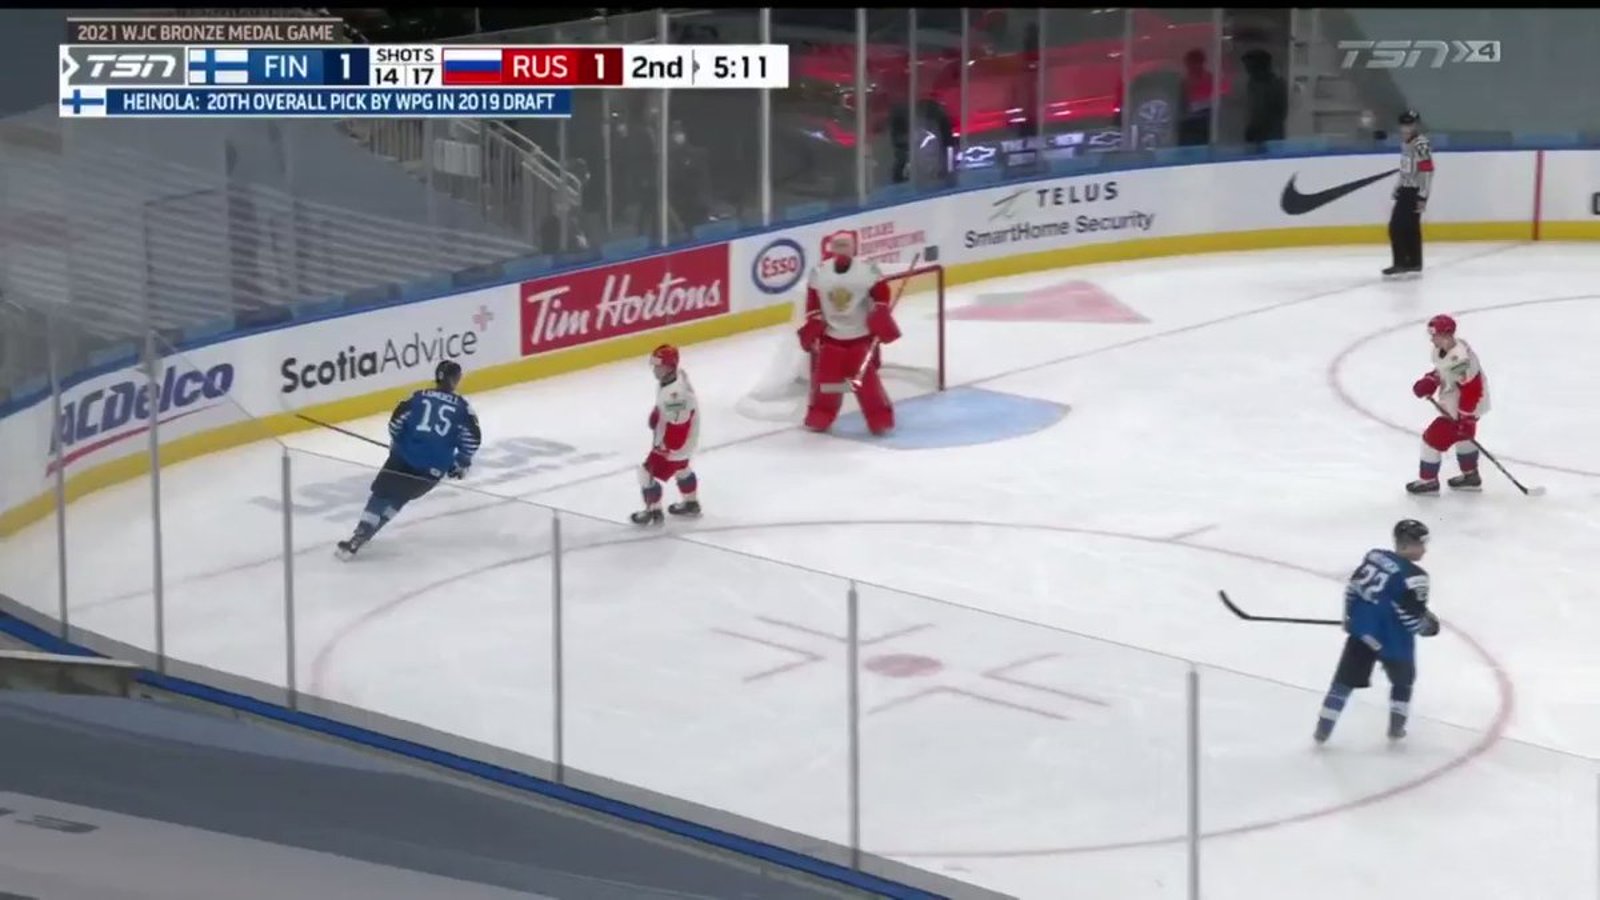 Referee Kyle Kowalski caught coaching Team Finland player on the ice! 